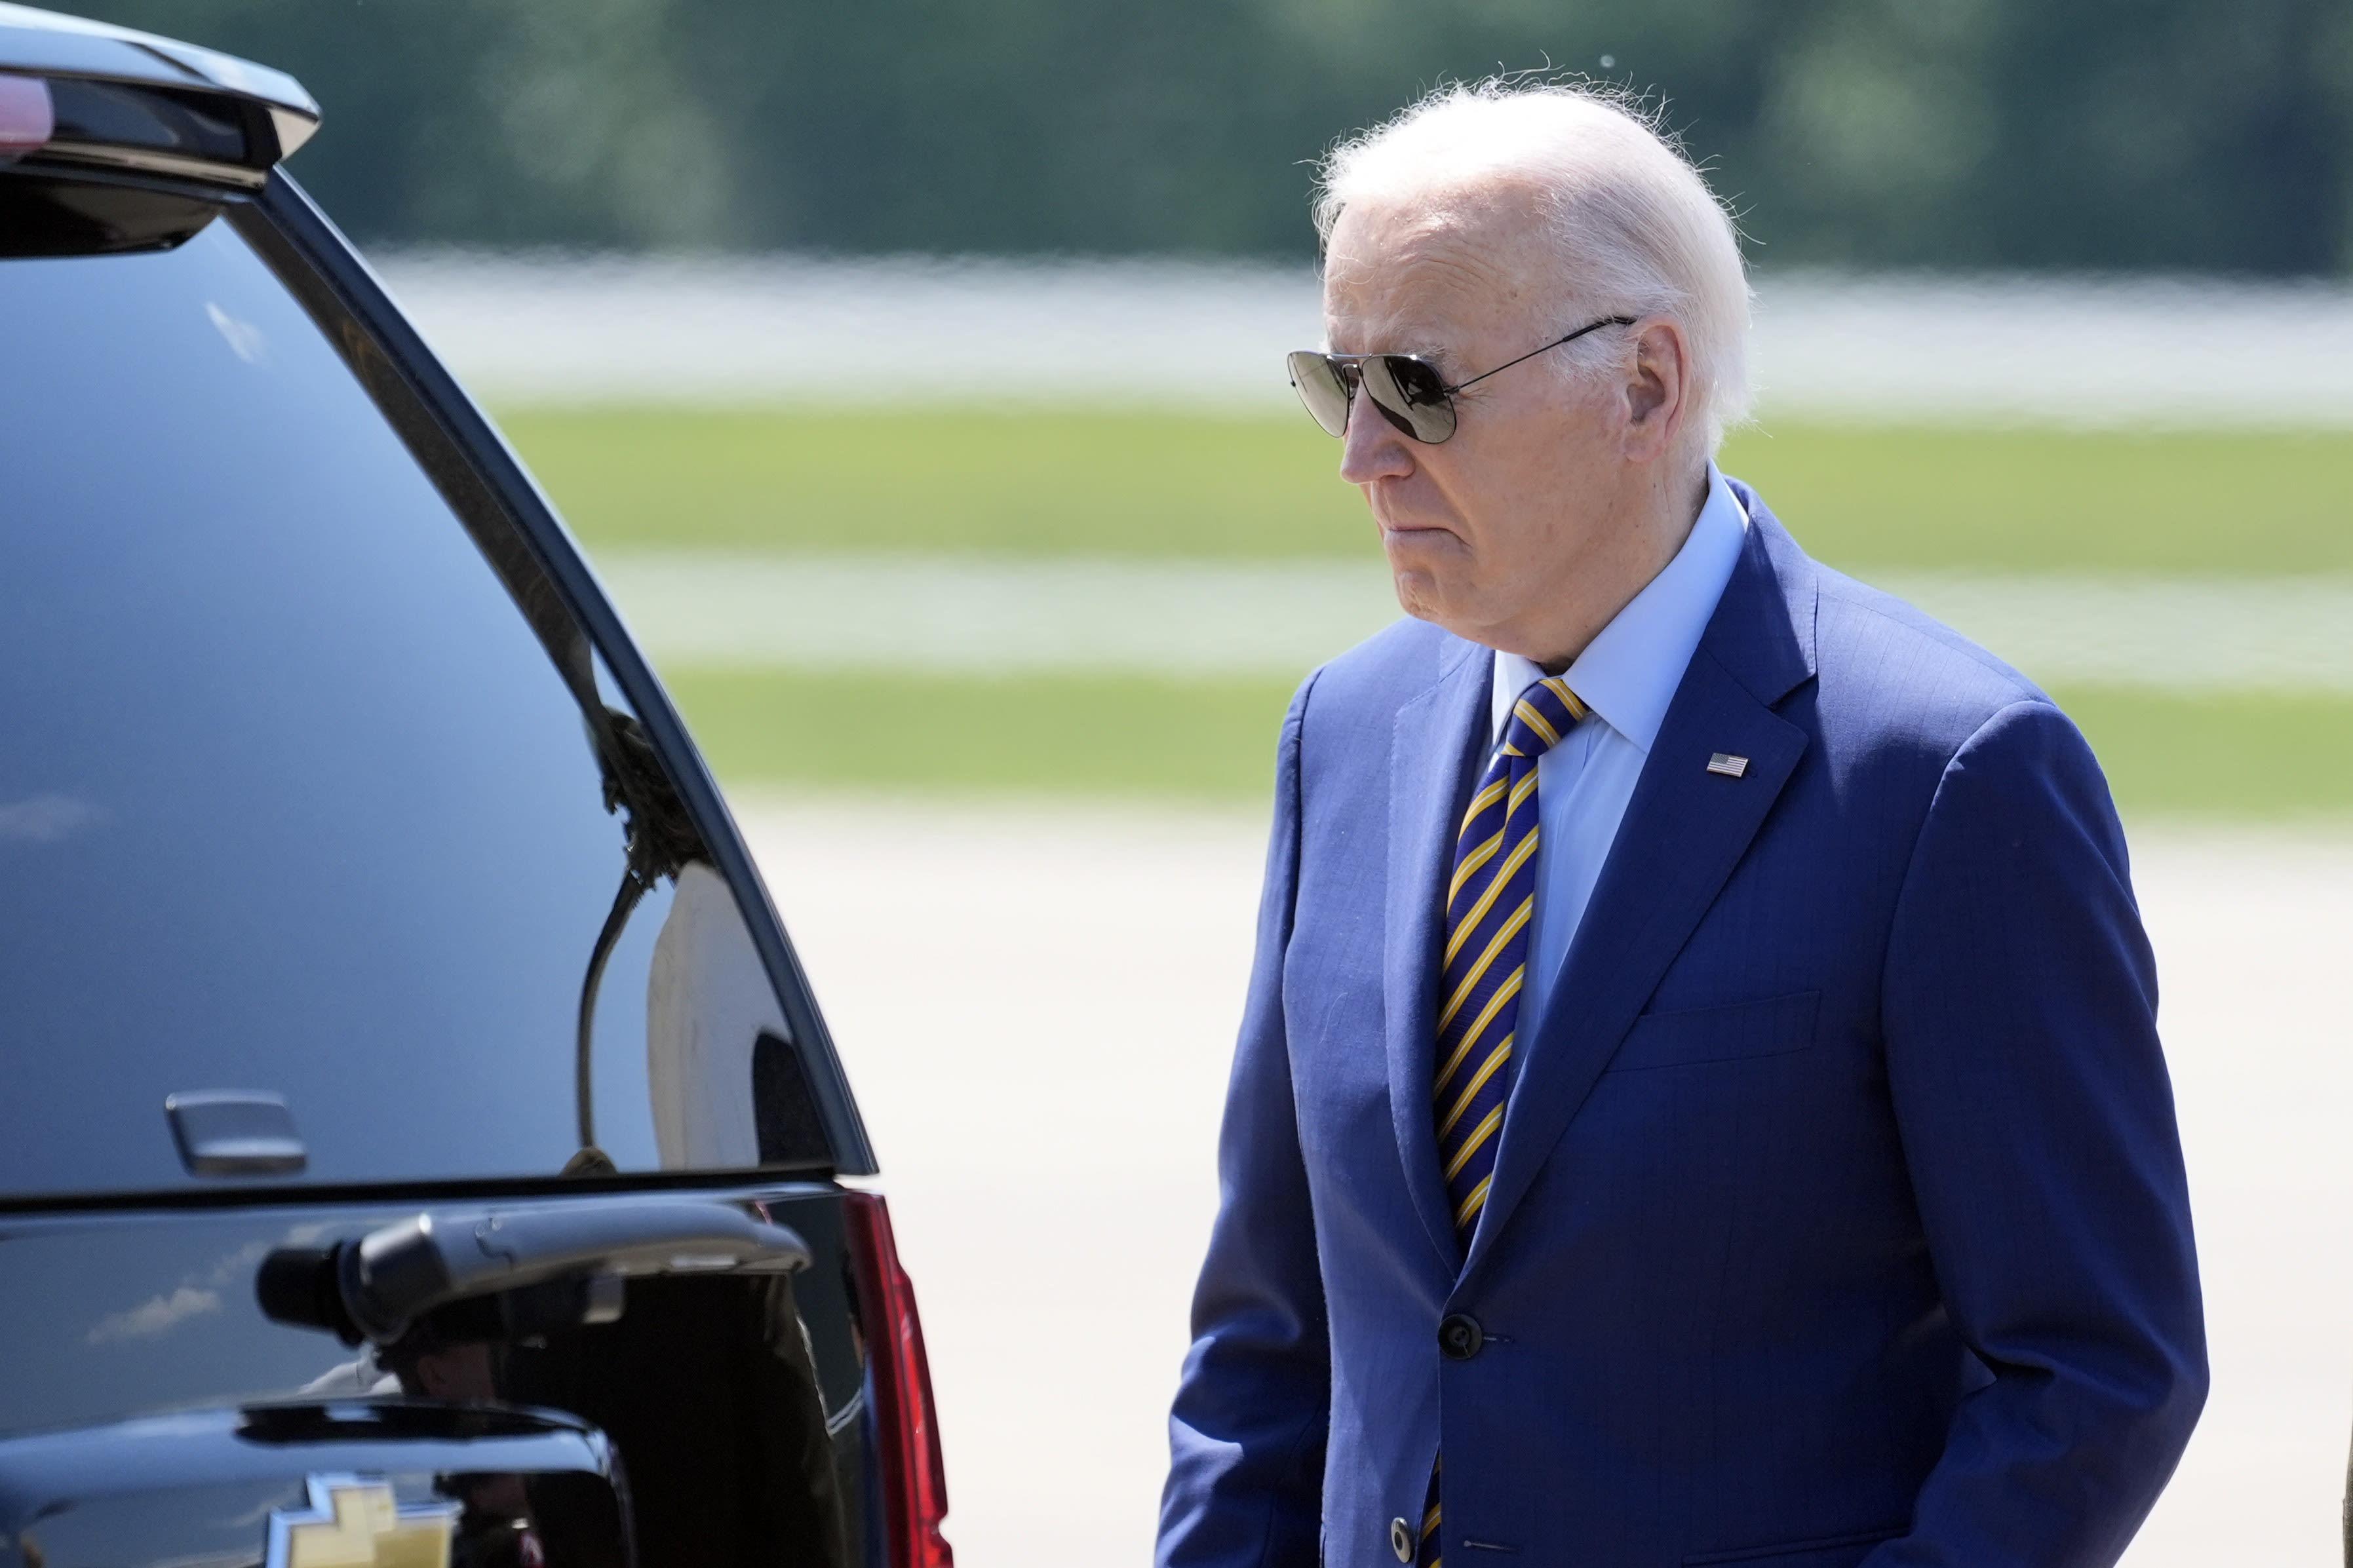 Biden has stayed silent on Trump’s trial. The verdict will change that.